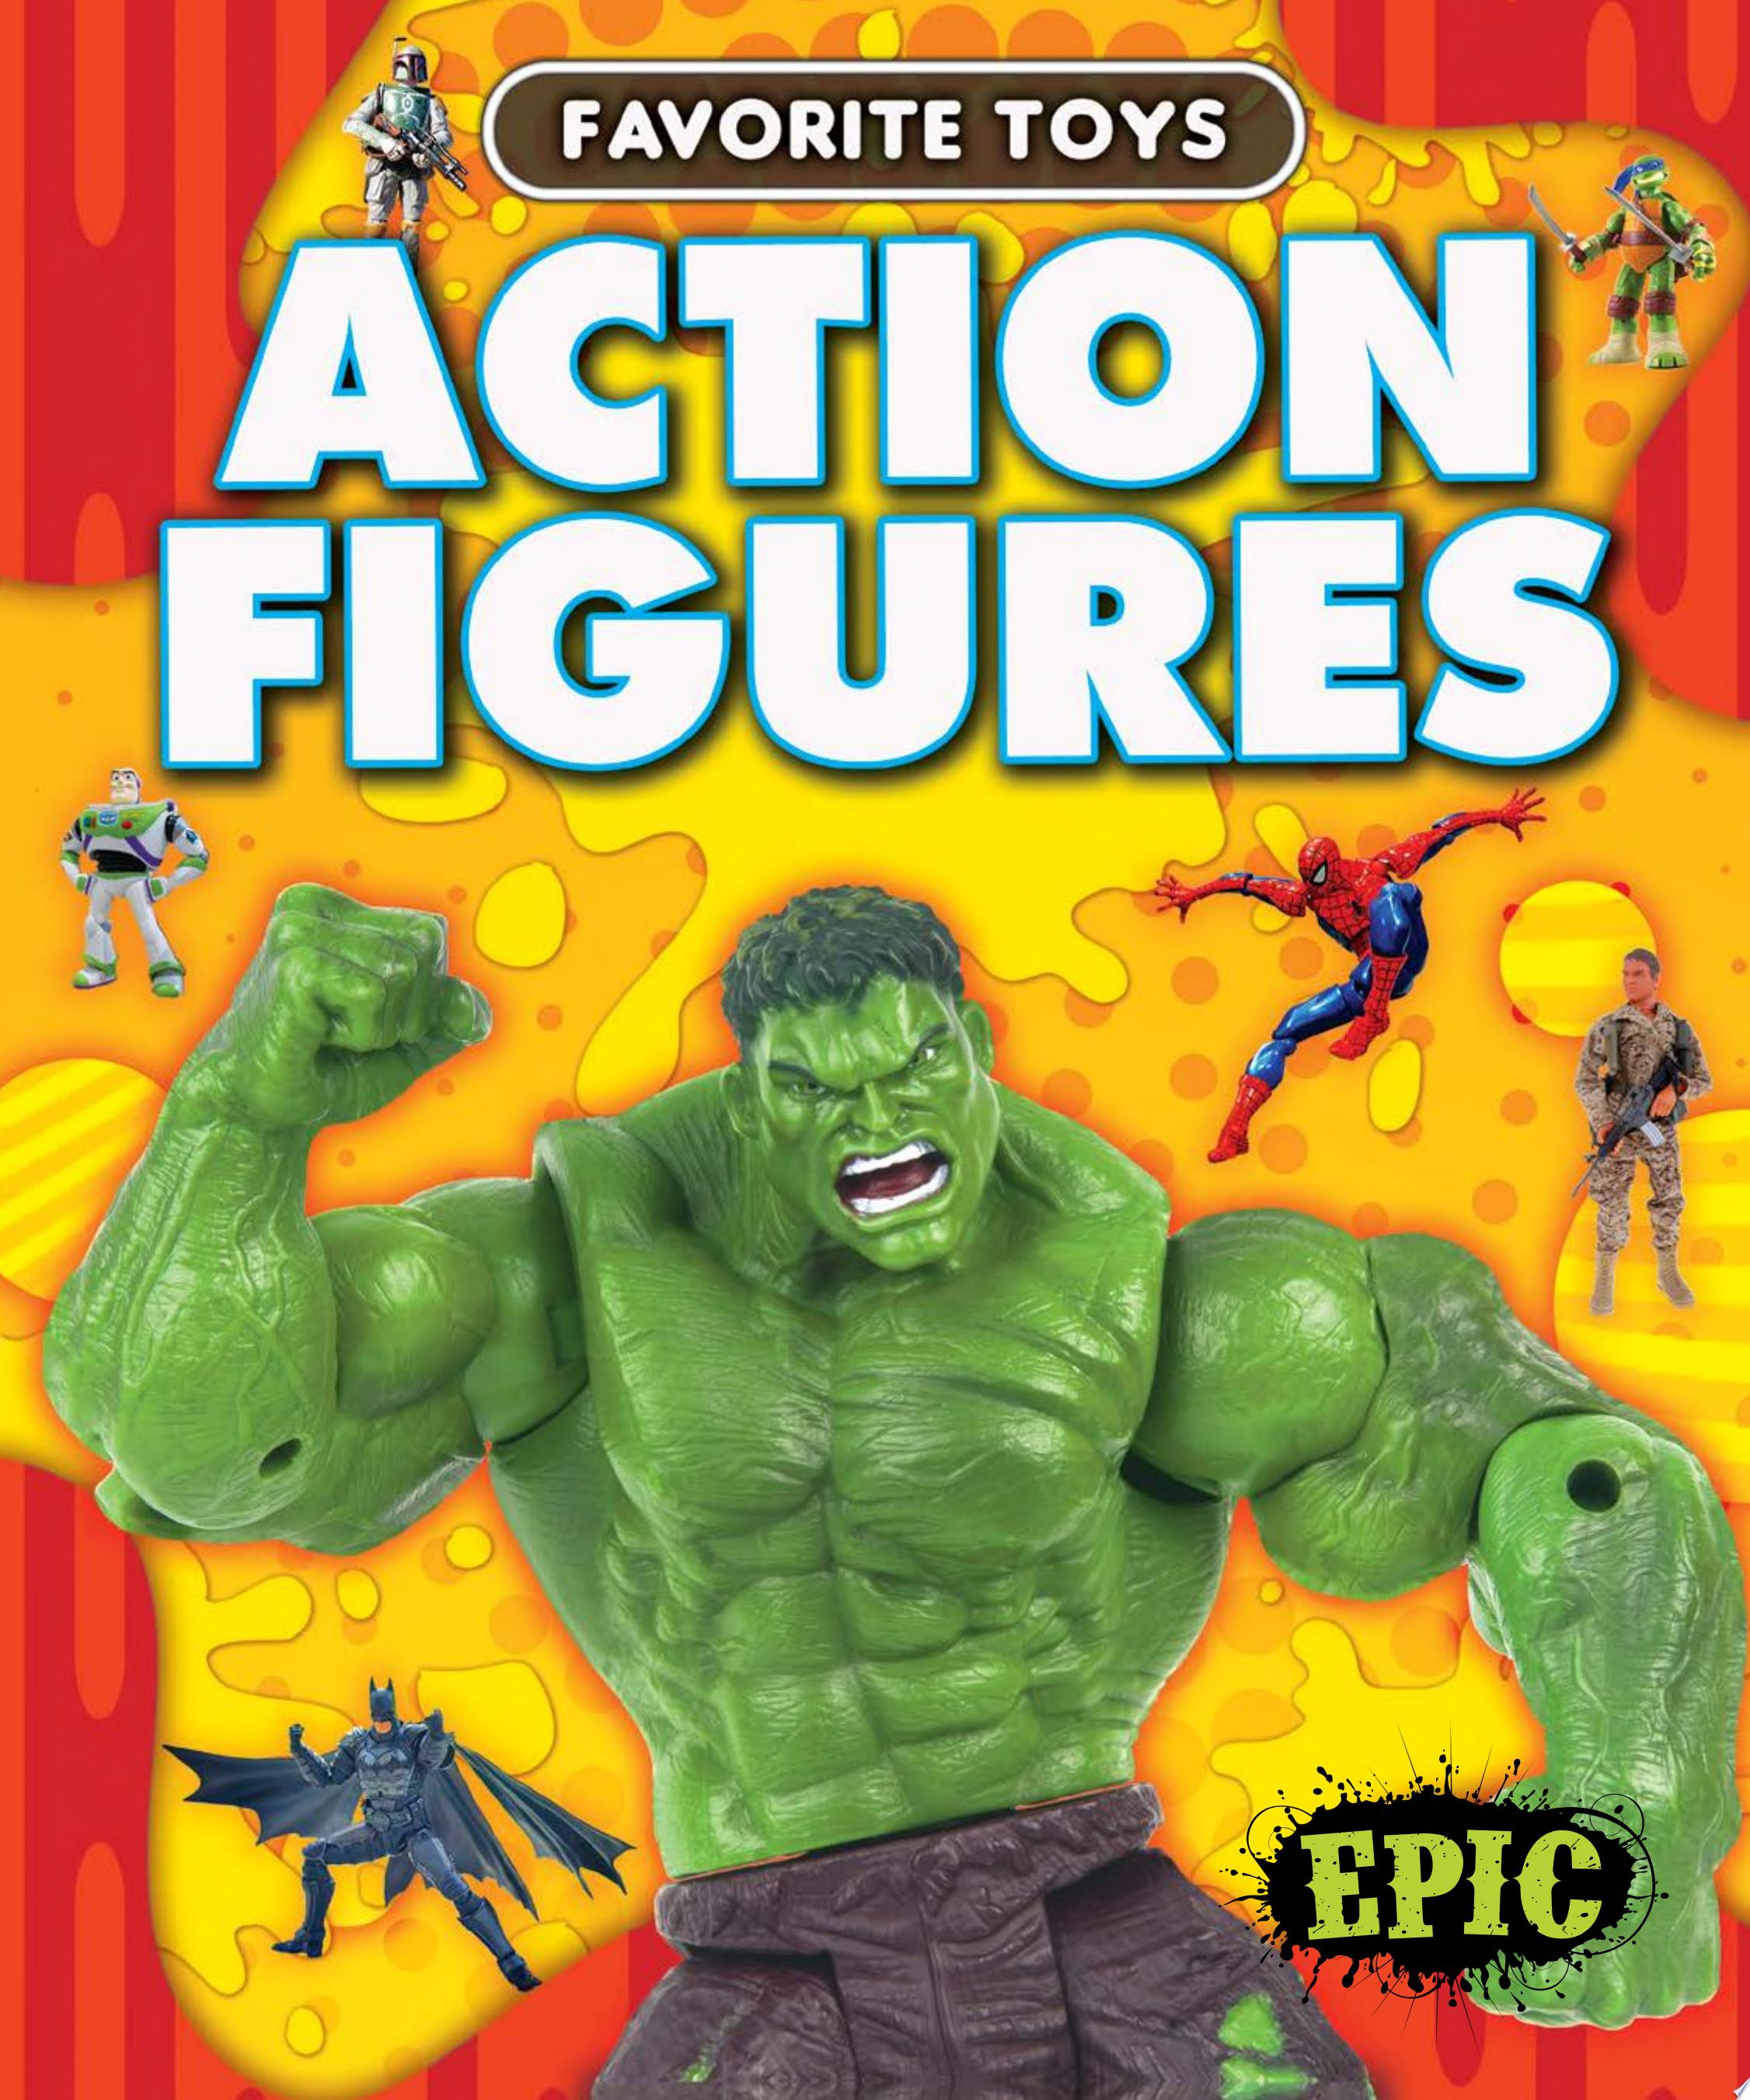 Image for "Action Figures"